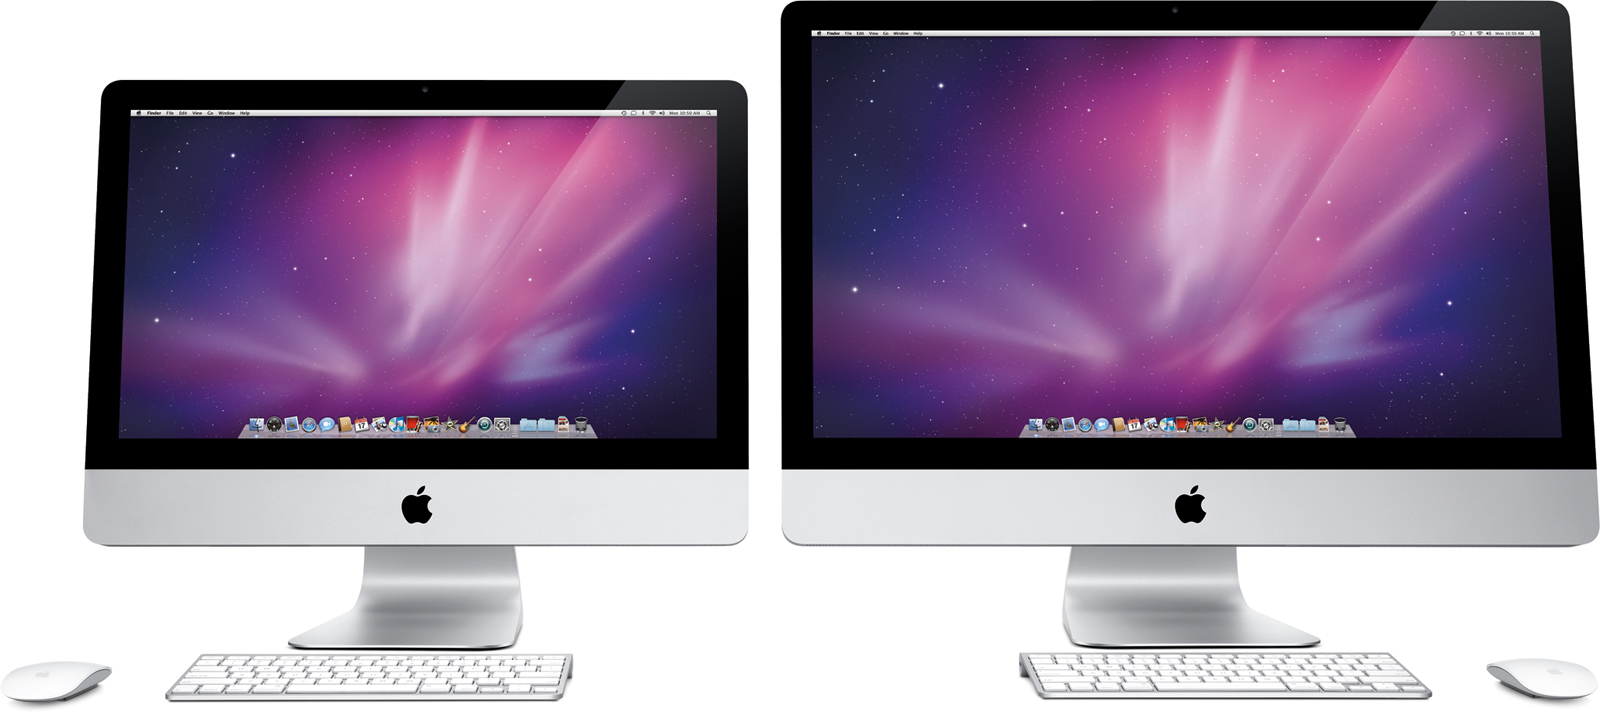 Rumor: iMacs with Sandy Bridge processors and Thunderbolt ports will arrive next week